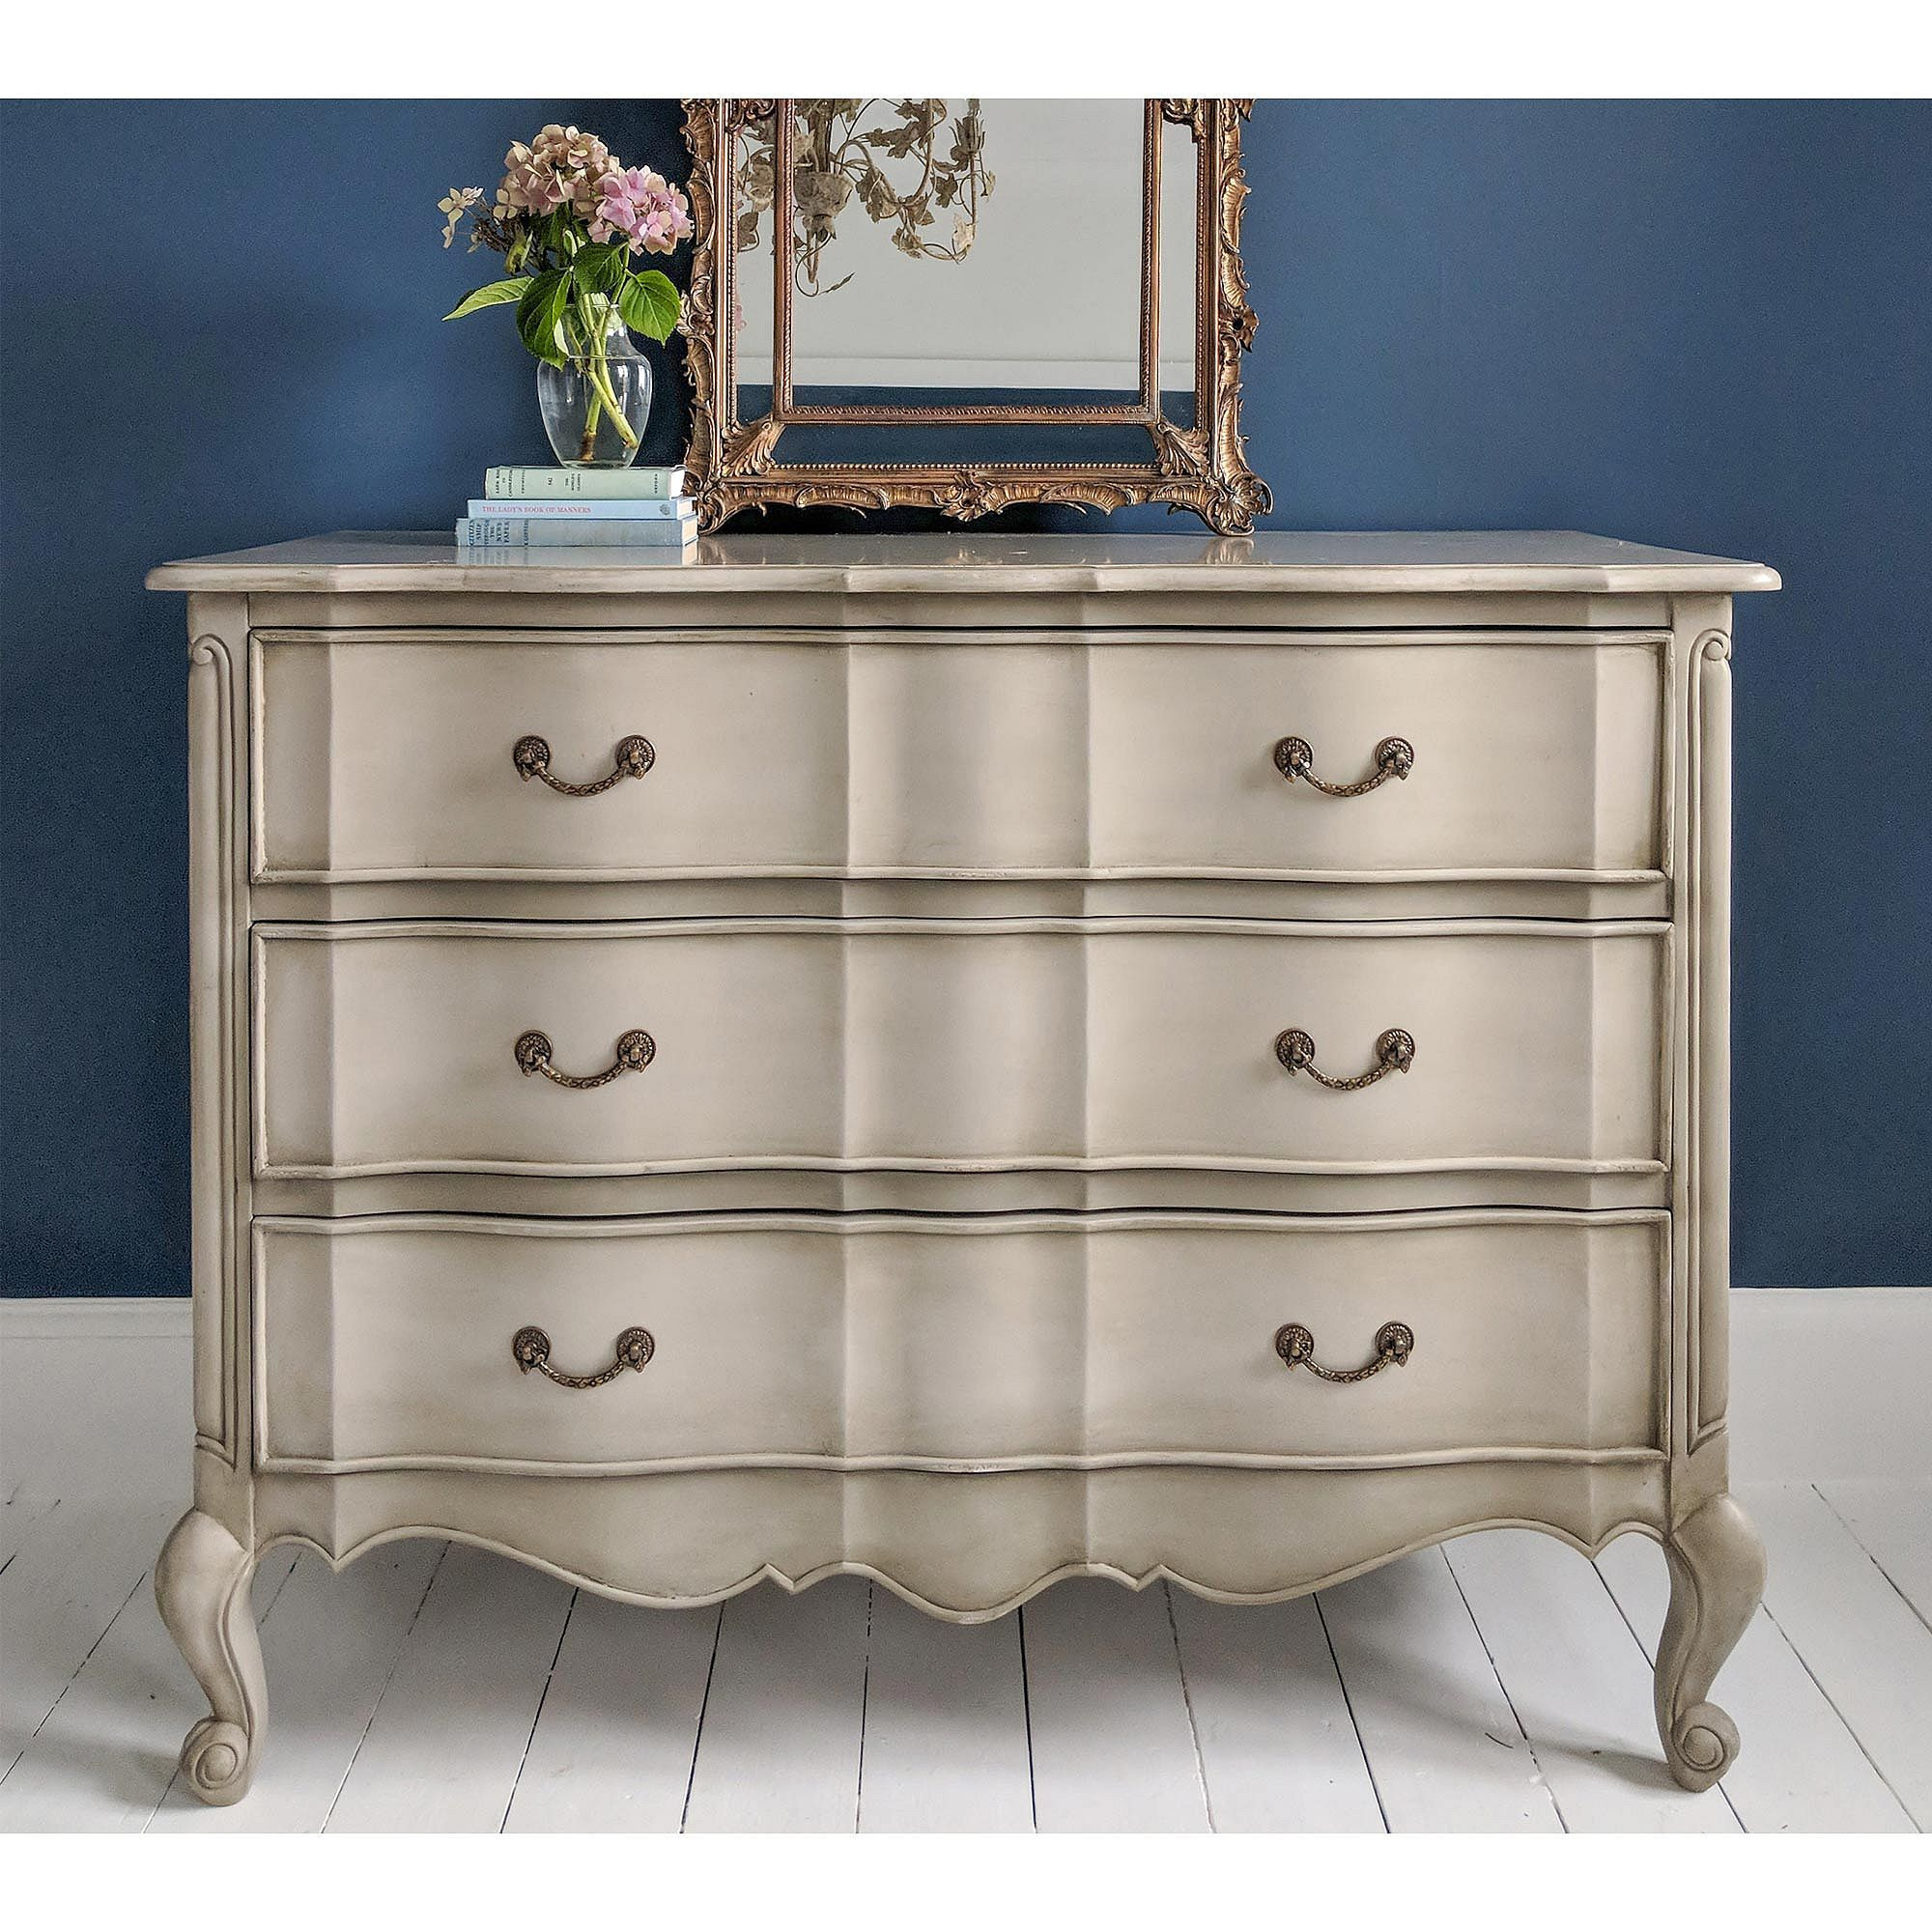 Normandy Classic Chest of Drawers - image 1